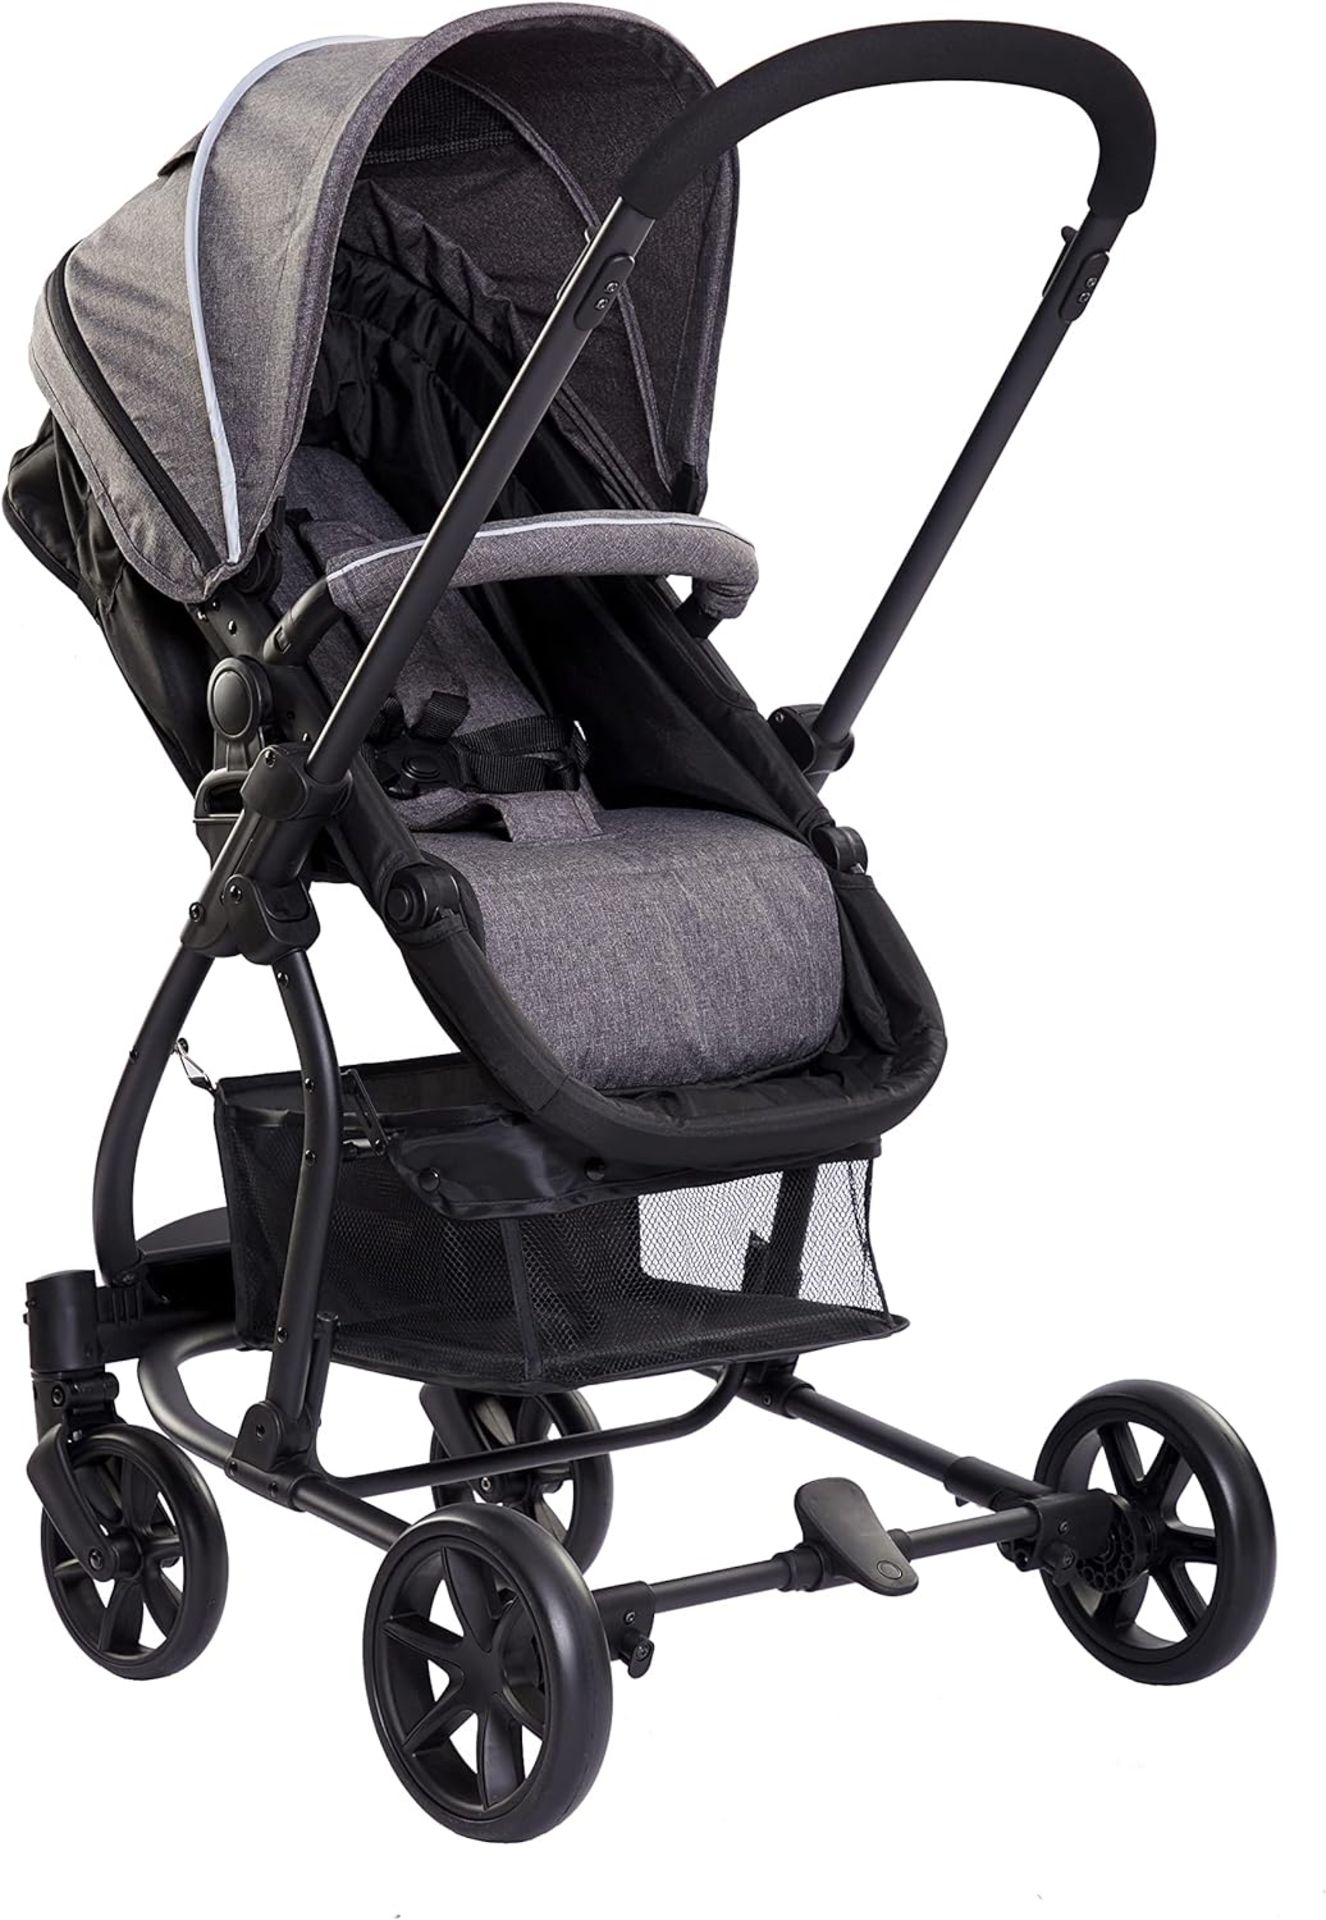 TRADE LOT 10 x NEW & BOXED RICCO Baby 2-in-1 Foldable Buggy Stroller Pushchair with Reversible seat,